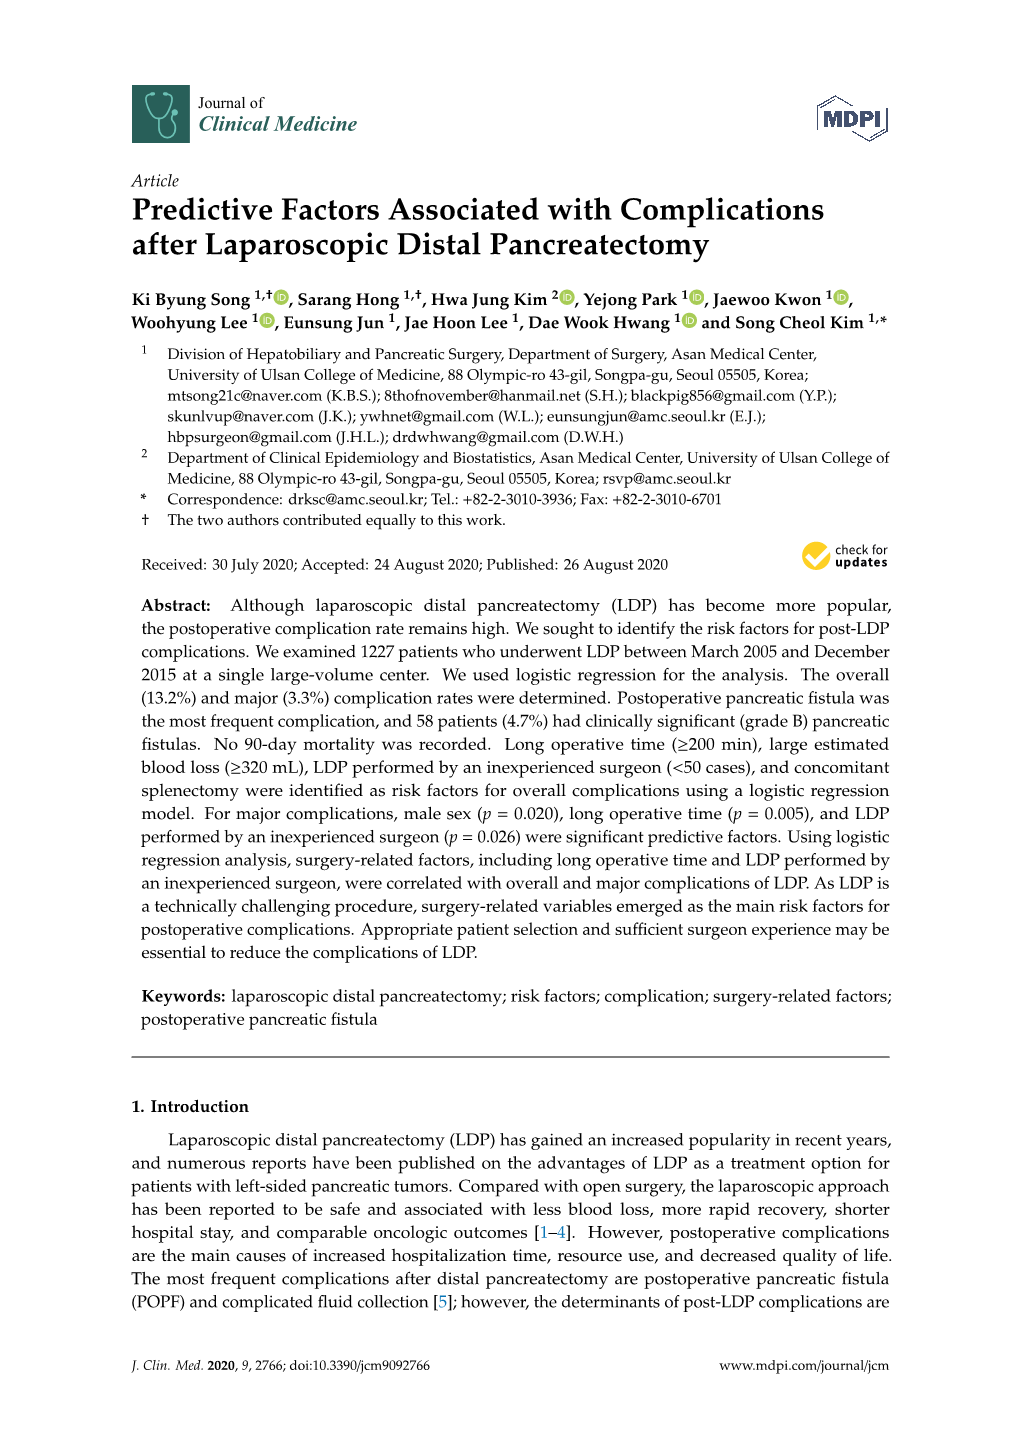 Predictive Factors Associated with Complications After Laparoscopic Distal Pancreatectomy